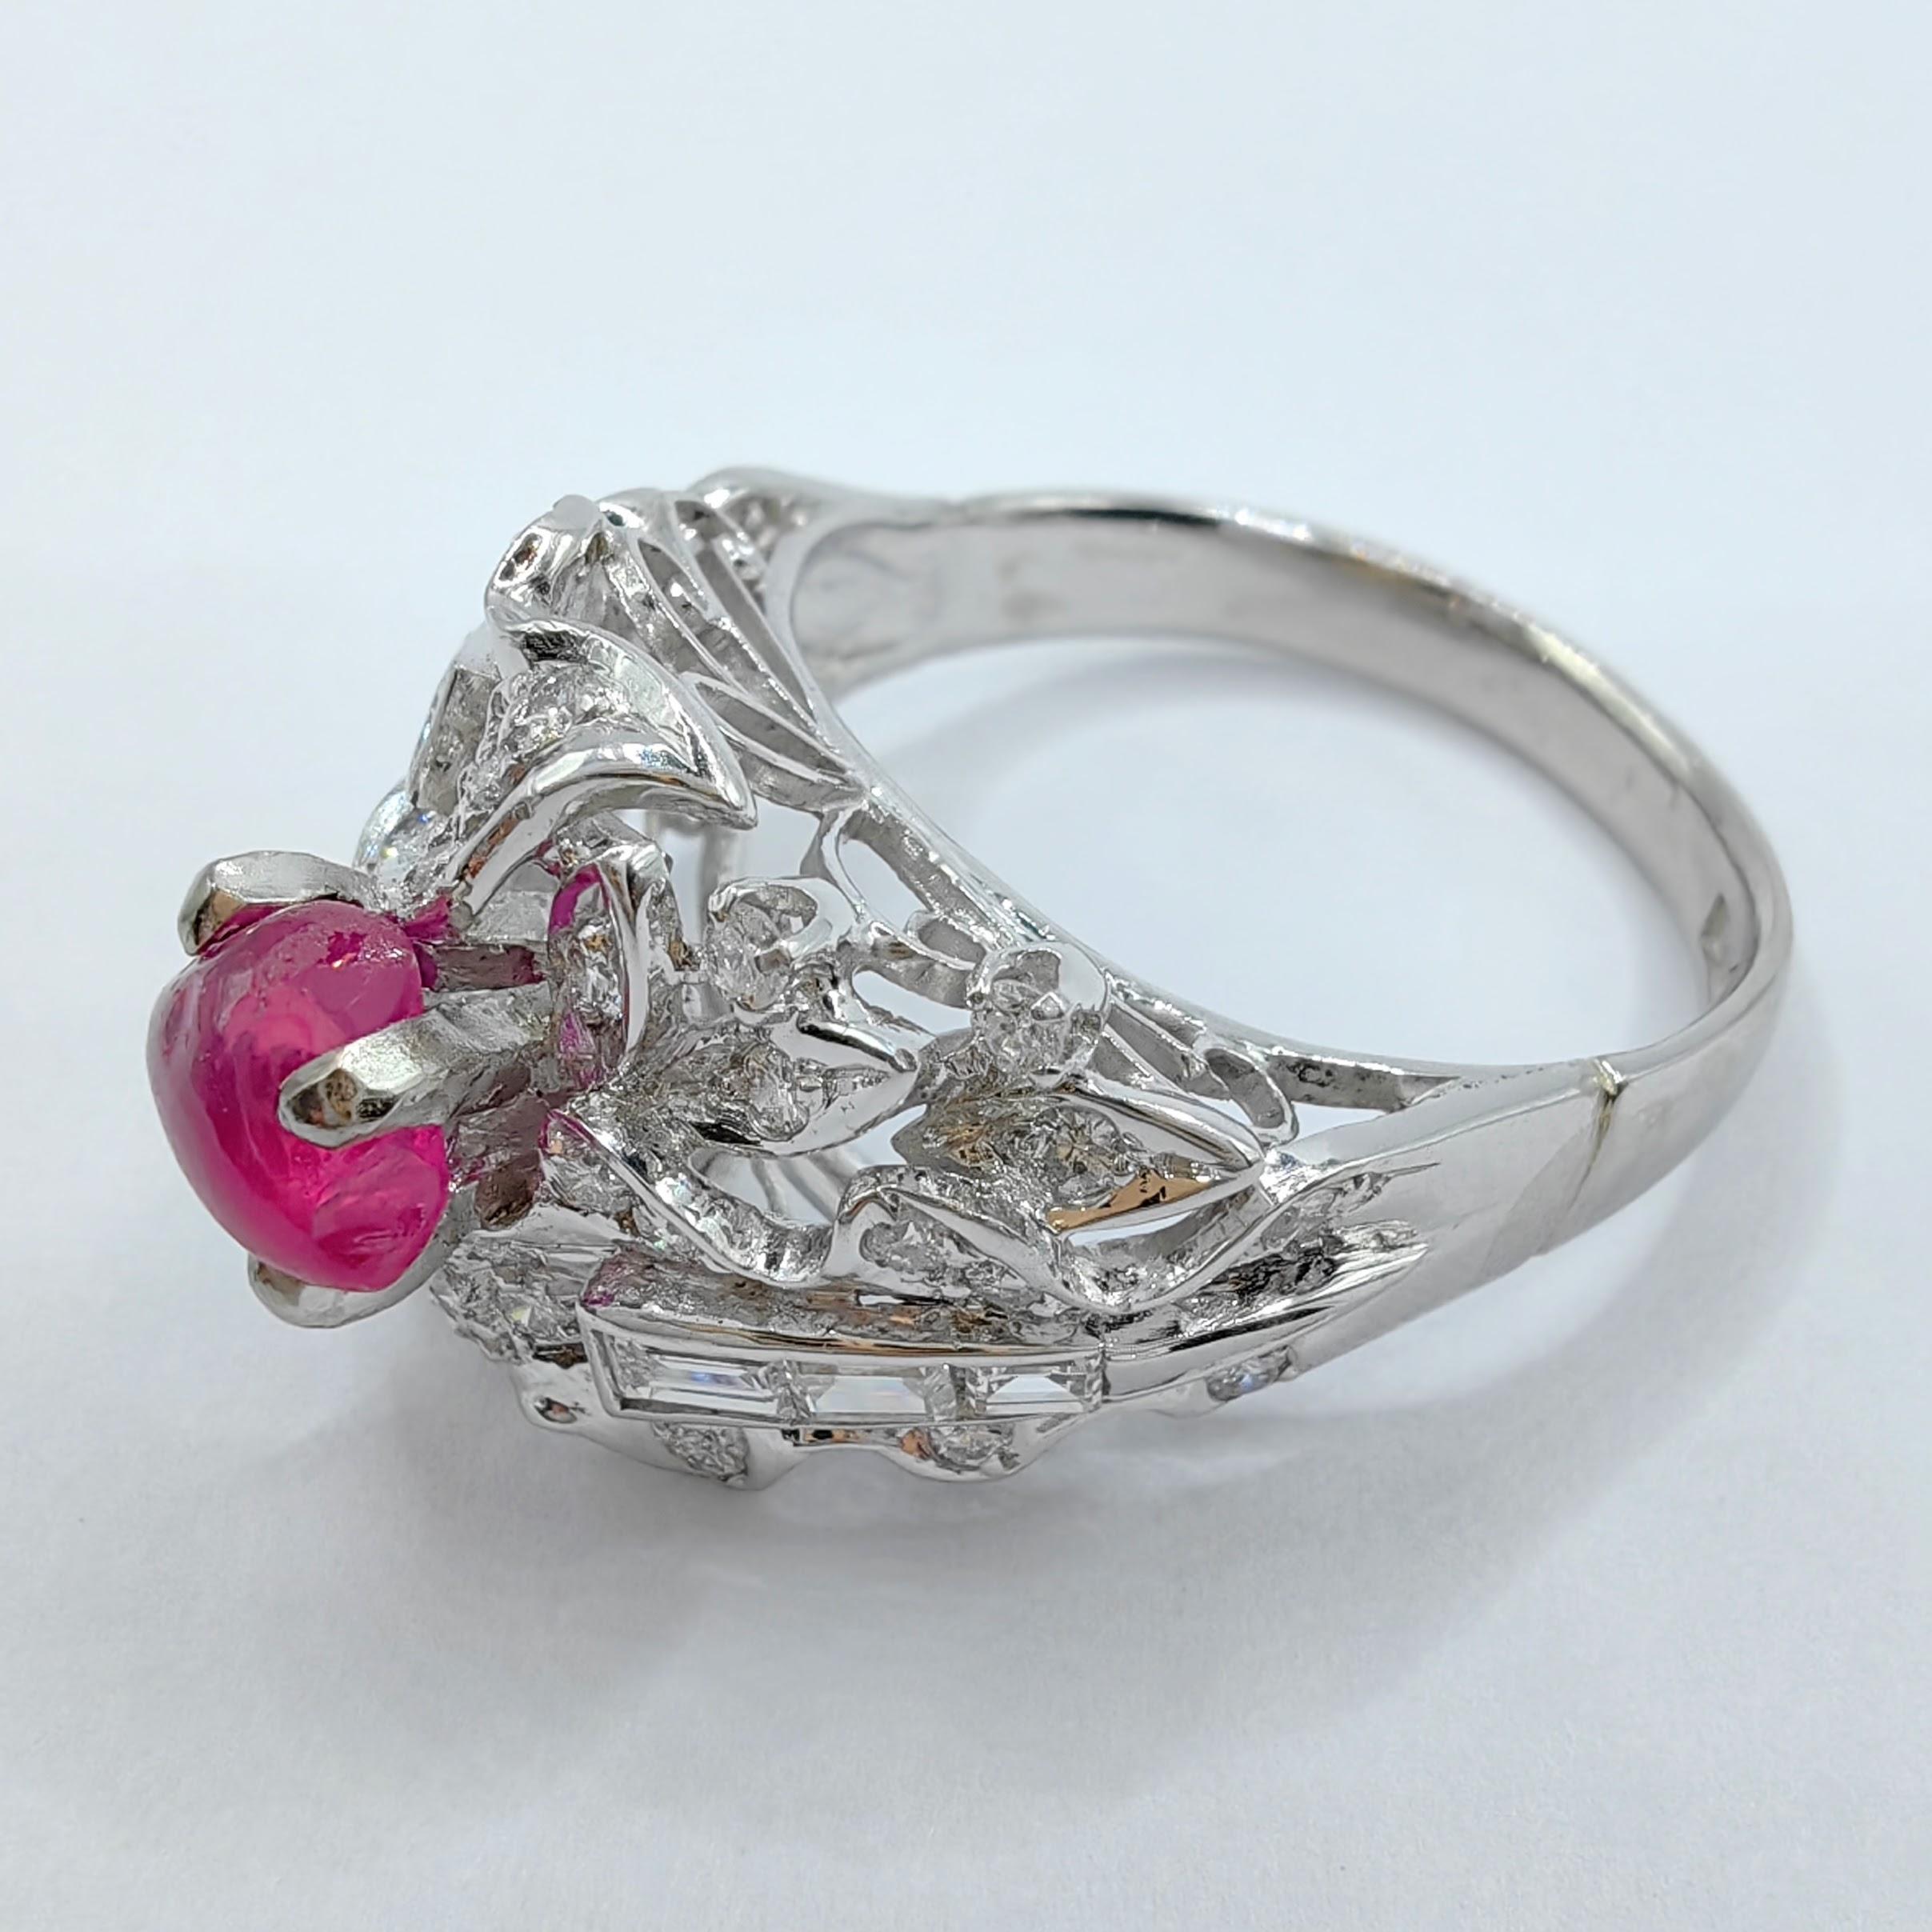 Uncut One-of-a-kind Vintage 1.52ct Freeform Ruby Edwardian Diamond Ring in Platinum For Sale